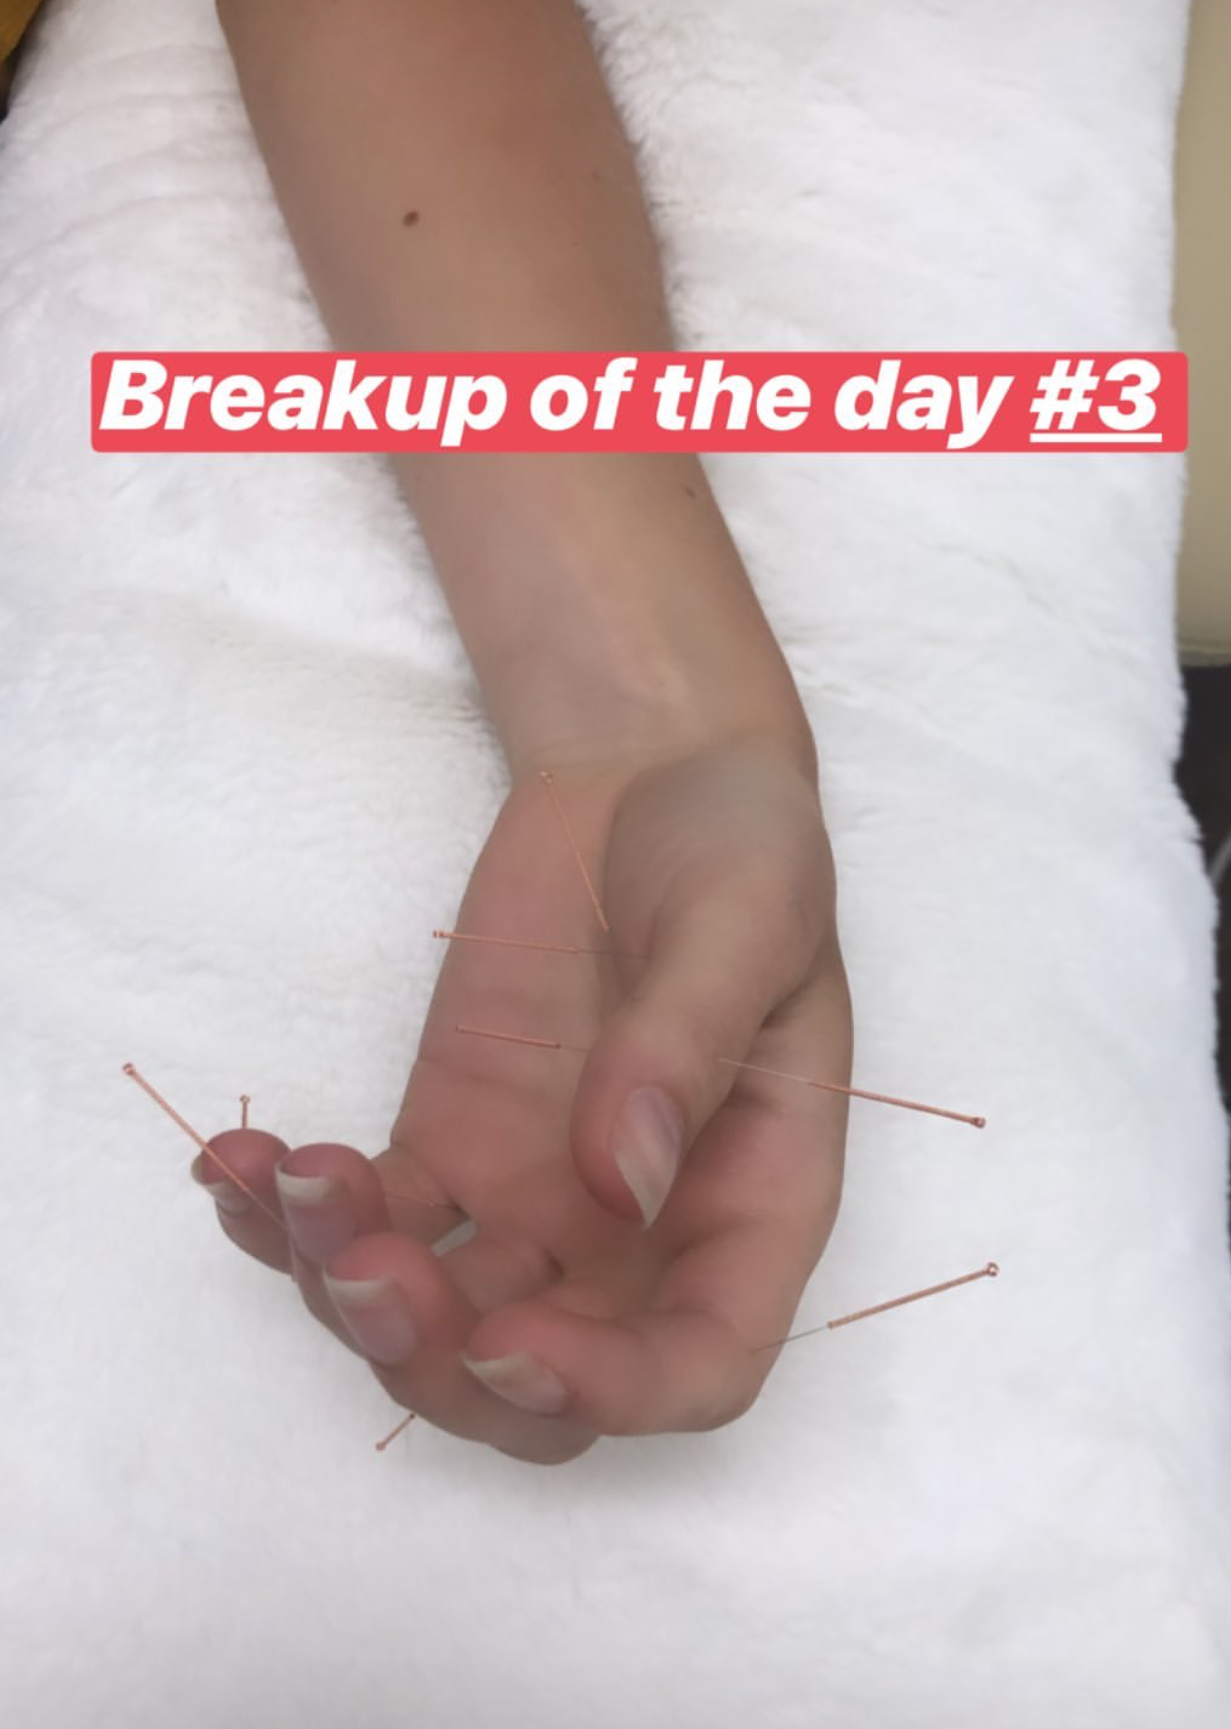  Continuation of Sujok acupuncture treatment for couples therapy, in this case third day of continuation for patient undergoing breakup 